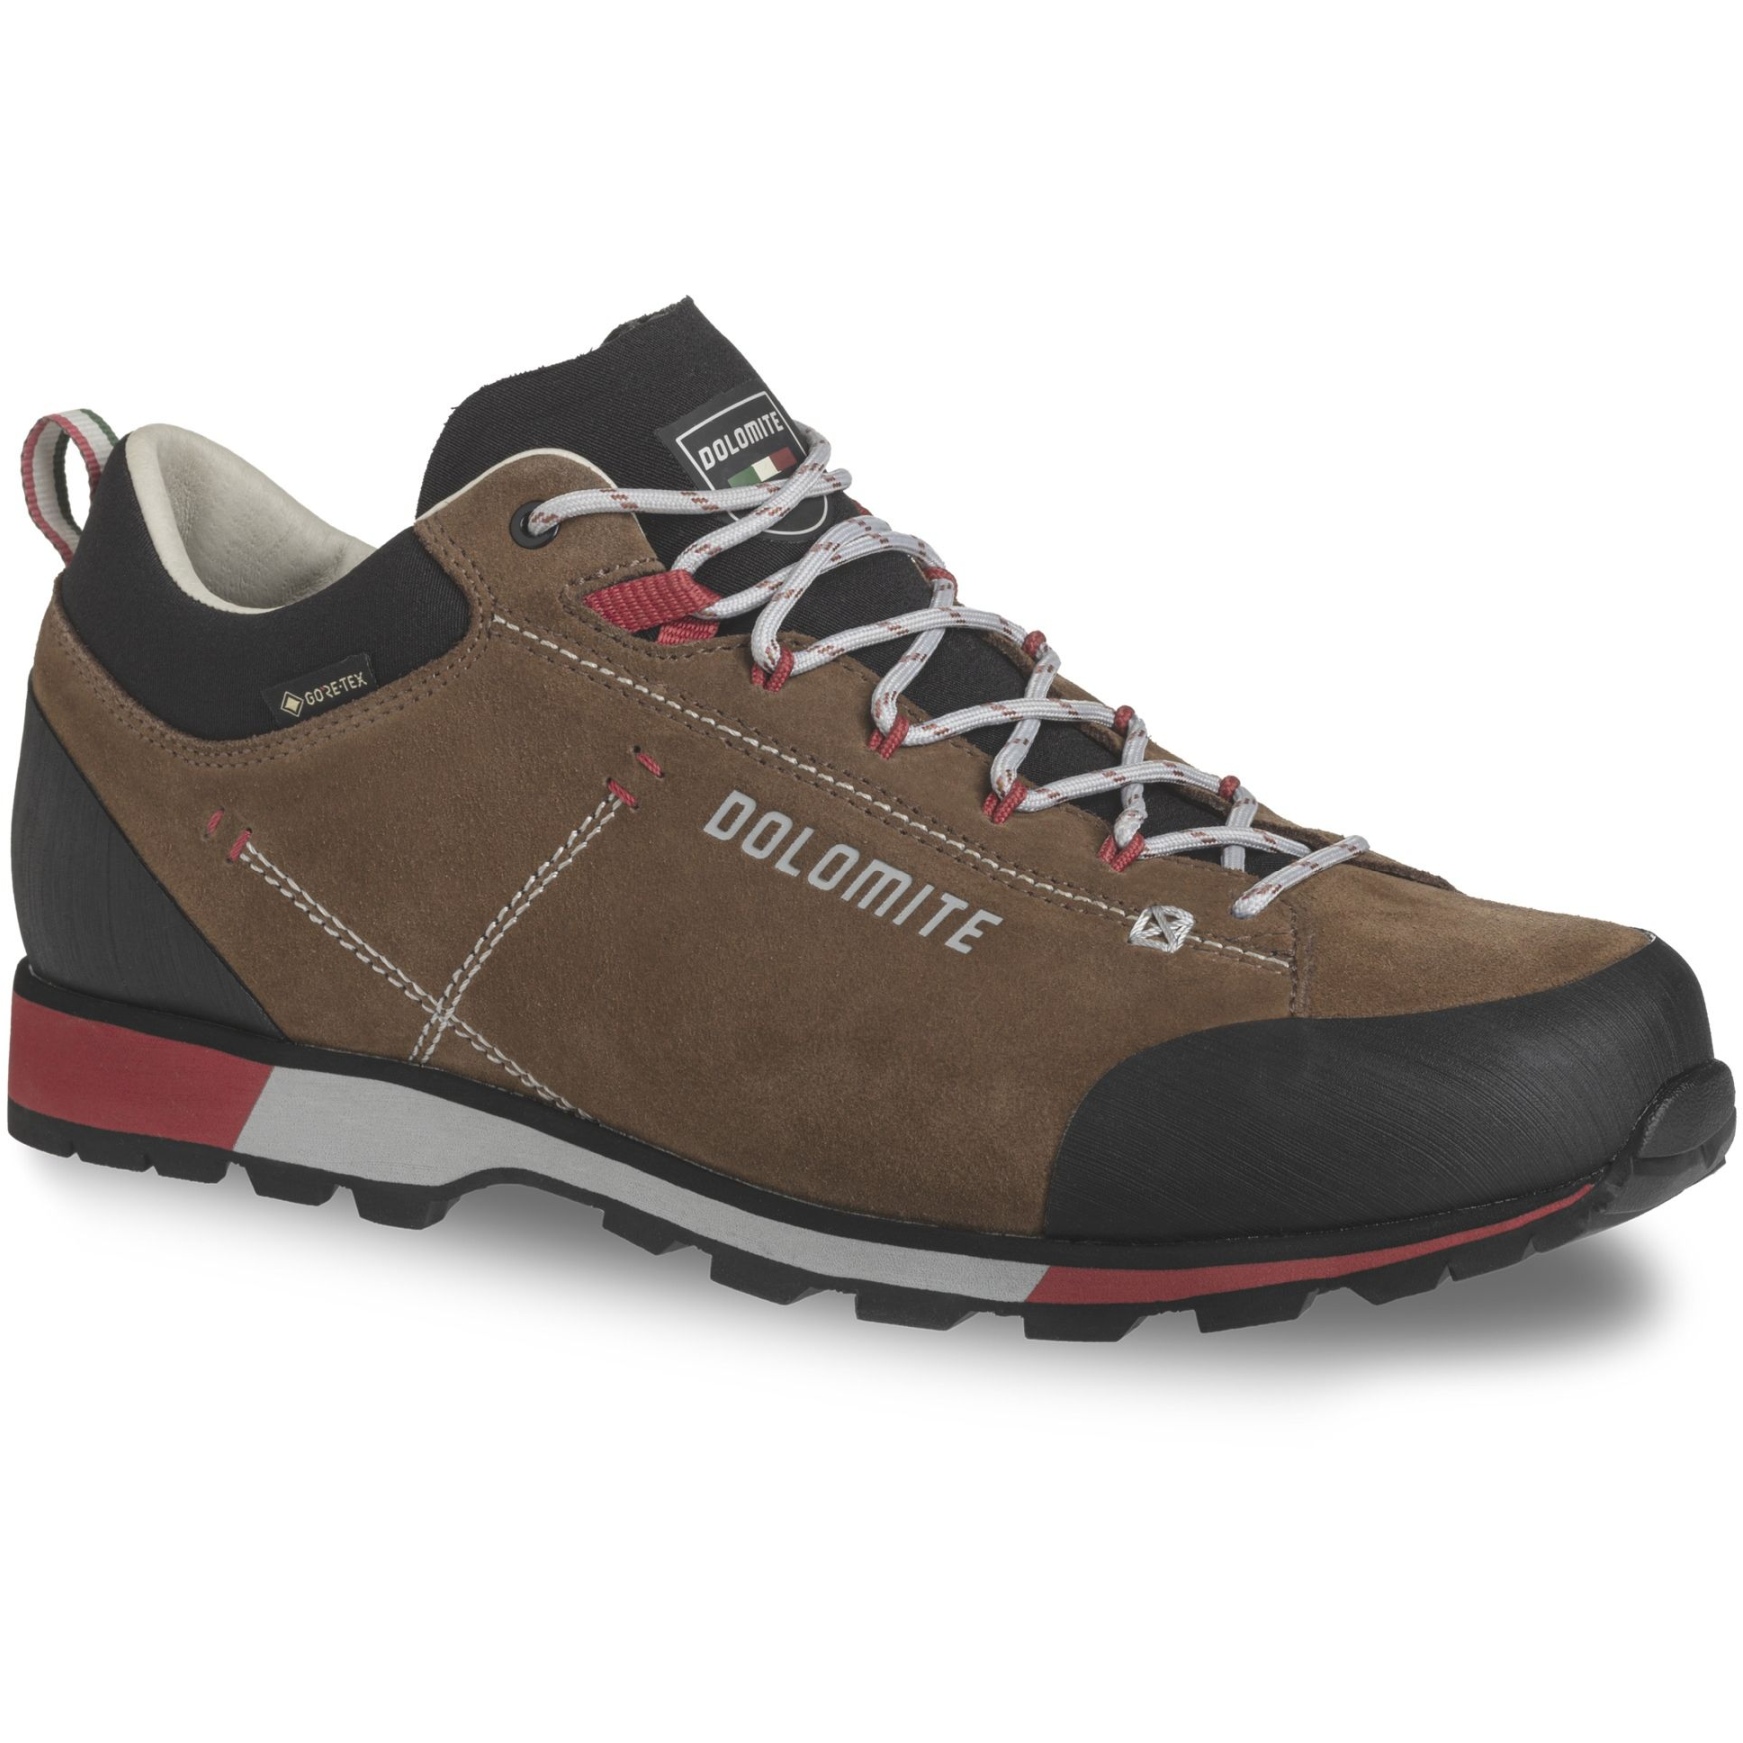 Picture of Dolomite 54 Hike Low Evo GORE-TEX Shoes Men - bronze brown